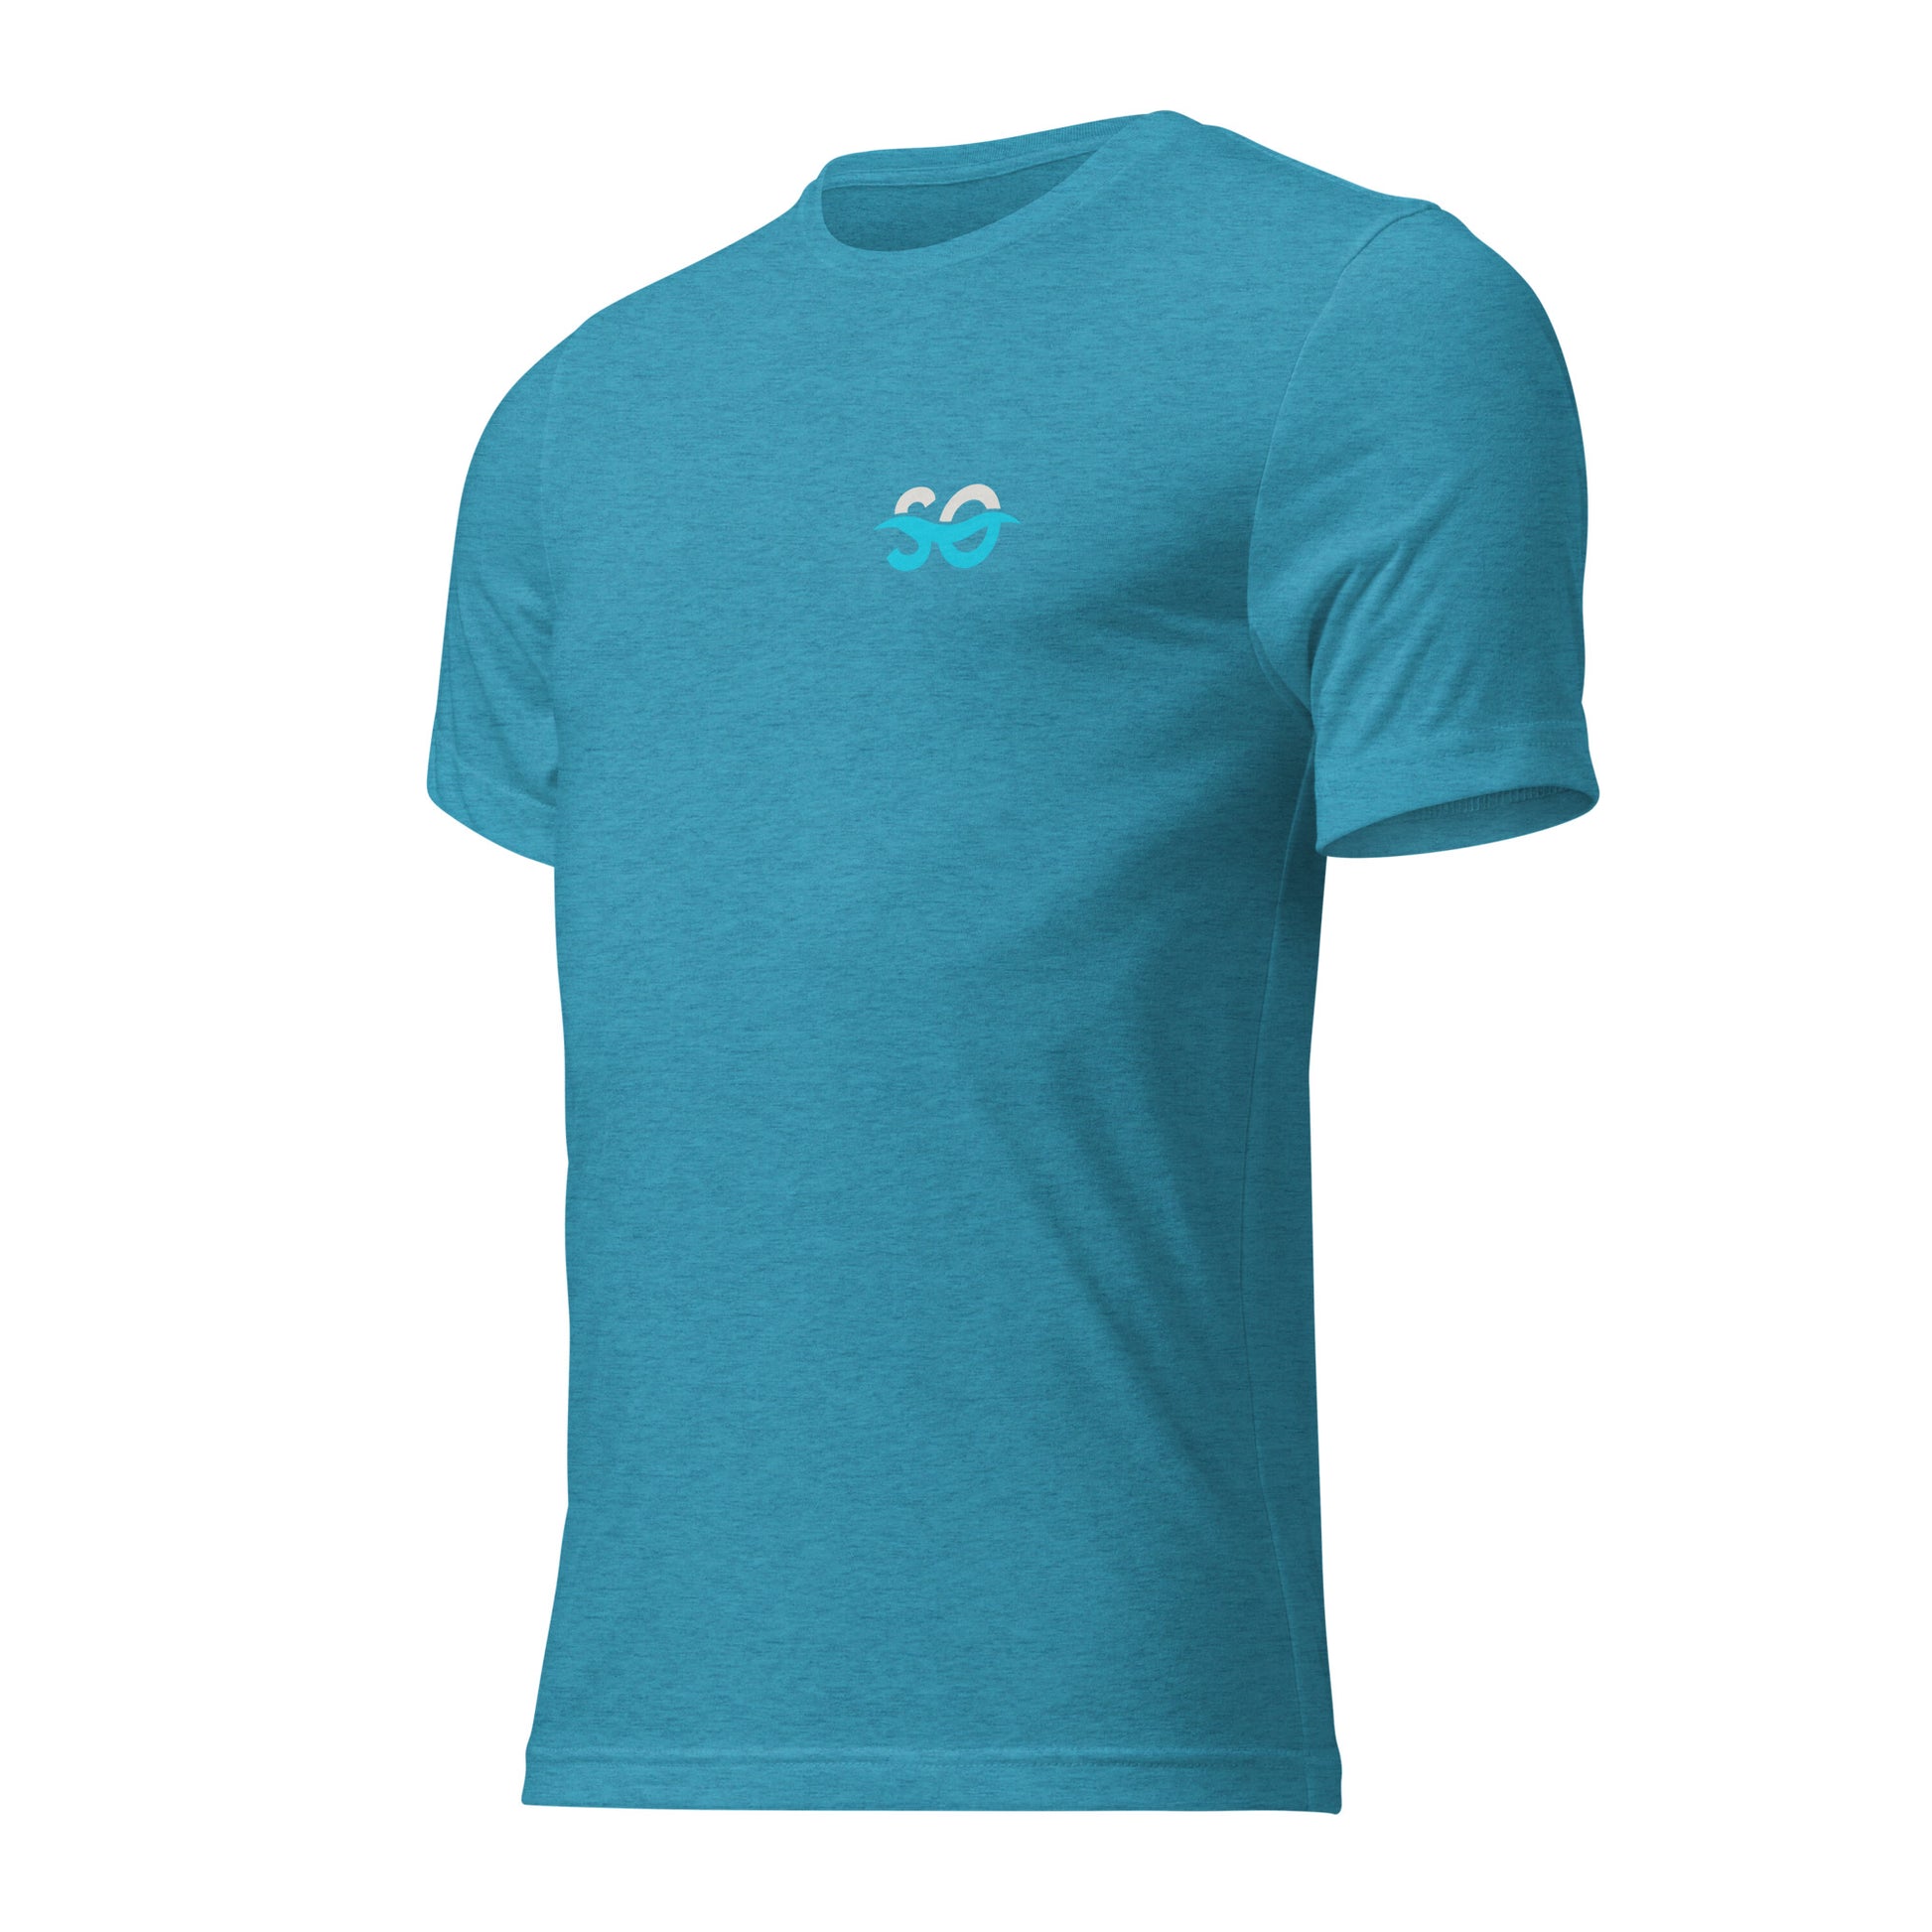 a blue t - shirt with a white logo on the chest